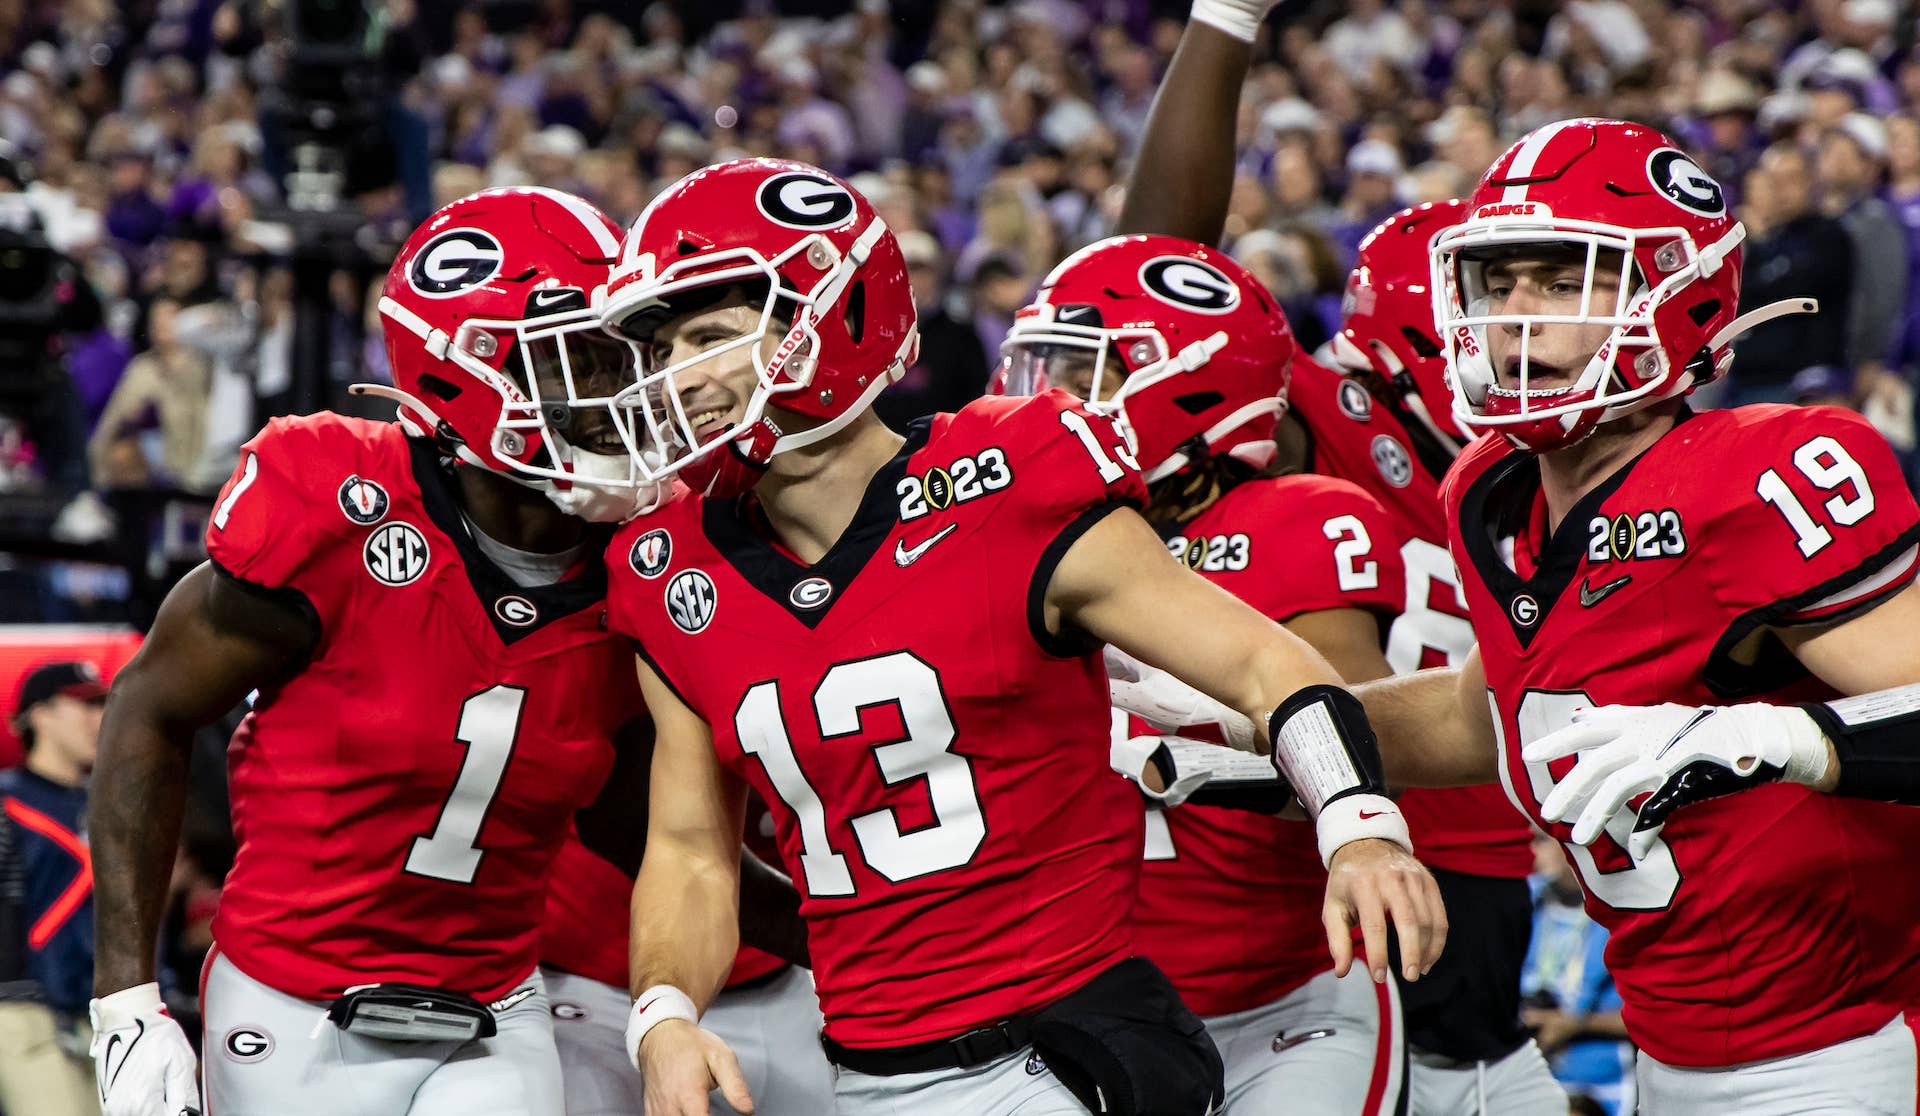 Georgia Bulldogs during the 2023 National Championship Game